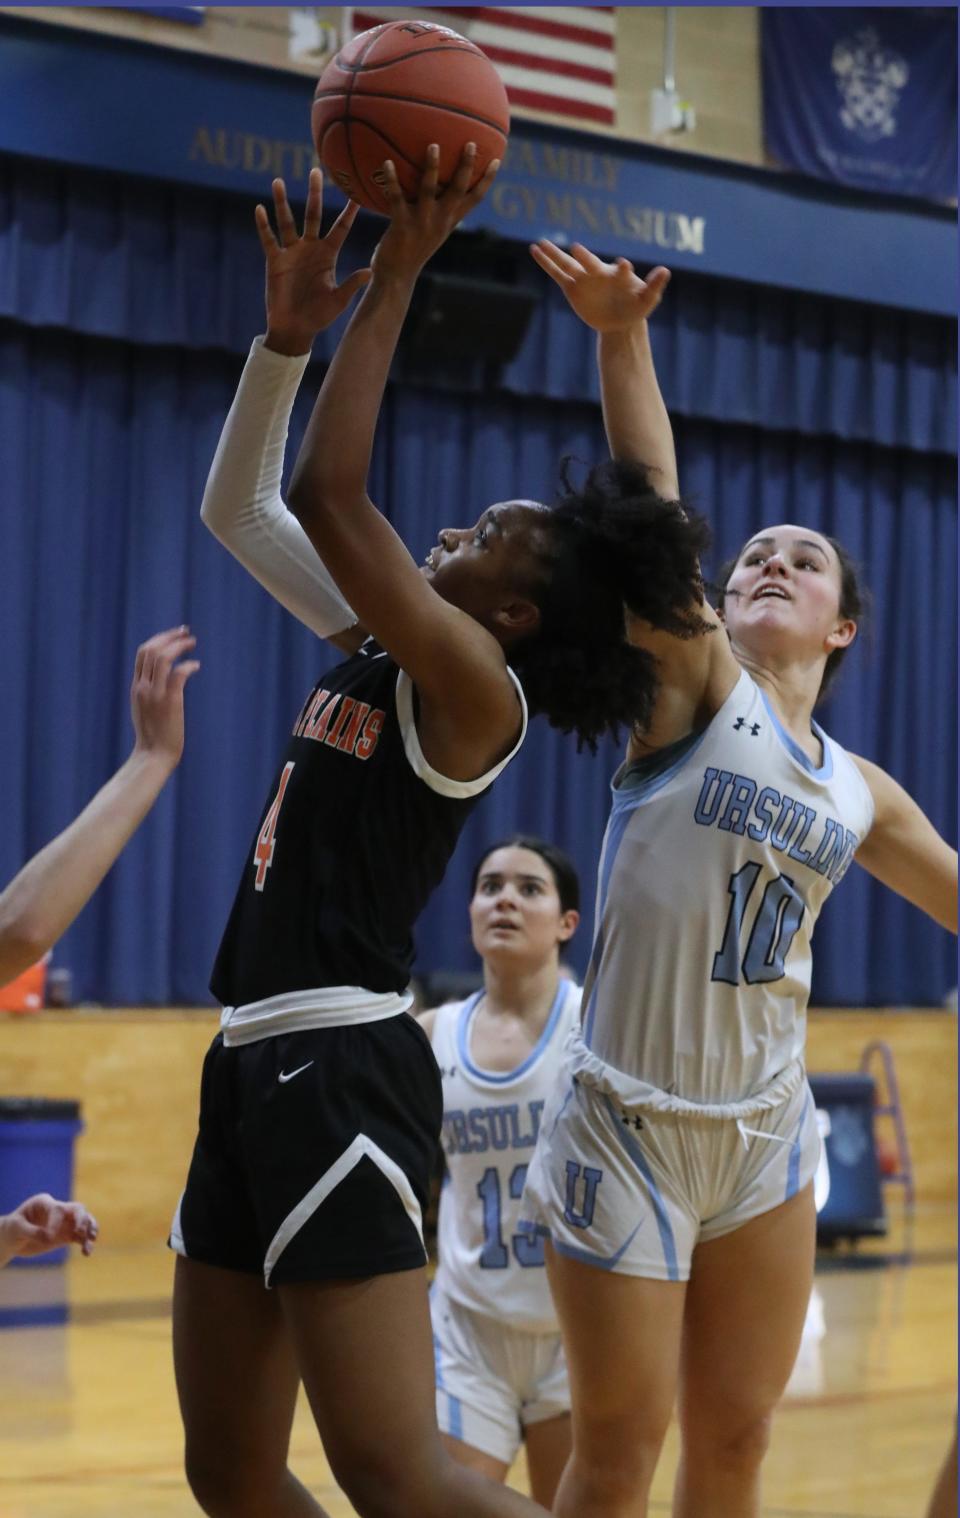 All-conference player Sequoia Layne of White Plains goes up for a shot as she's pressured by all-section player Sophie Nascimento of Ursuline during their game at Ursuline Jan. 30, 2023. White Plains won 50-44.